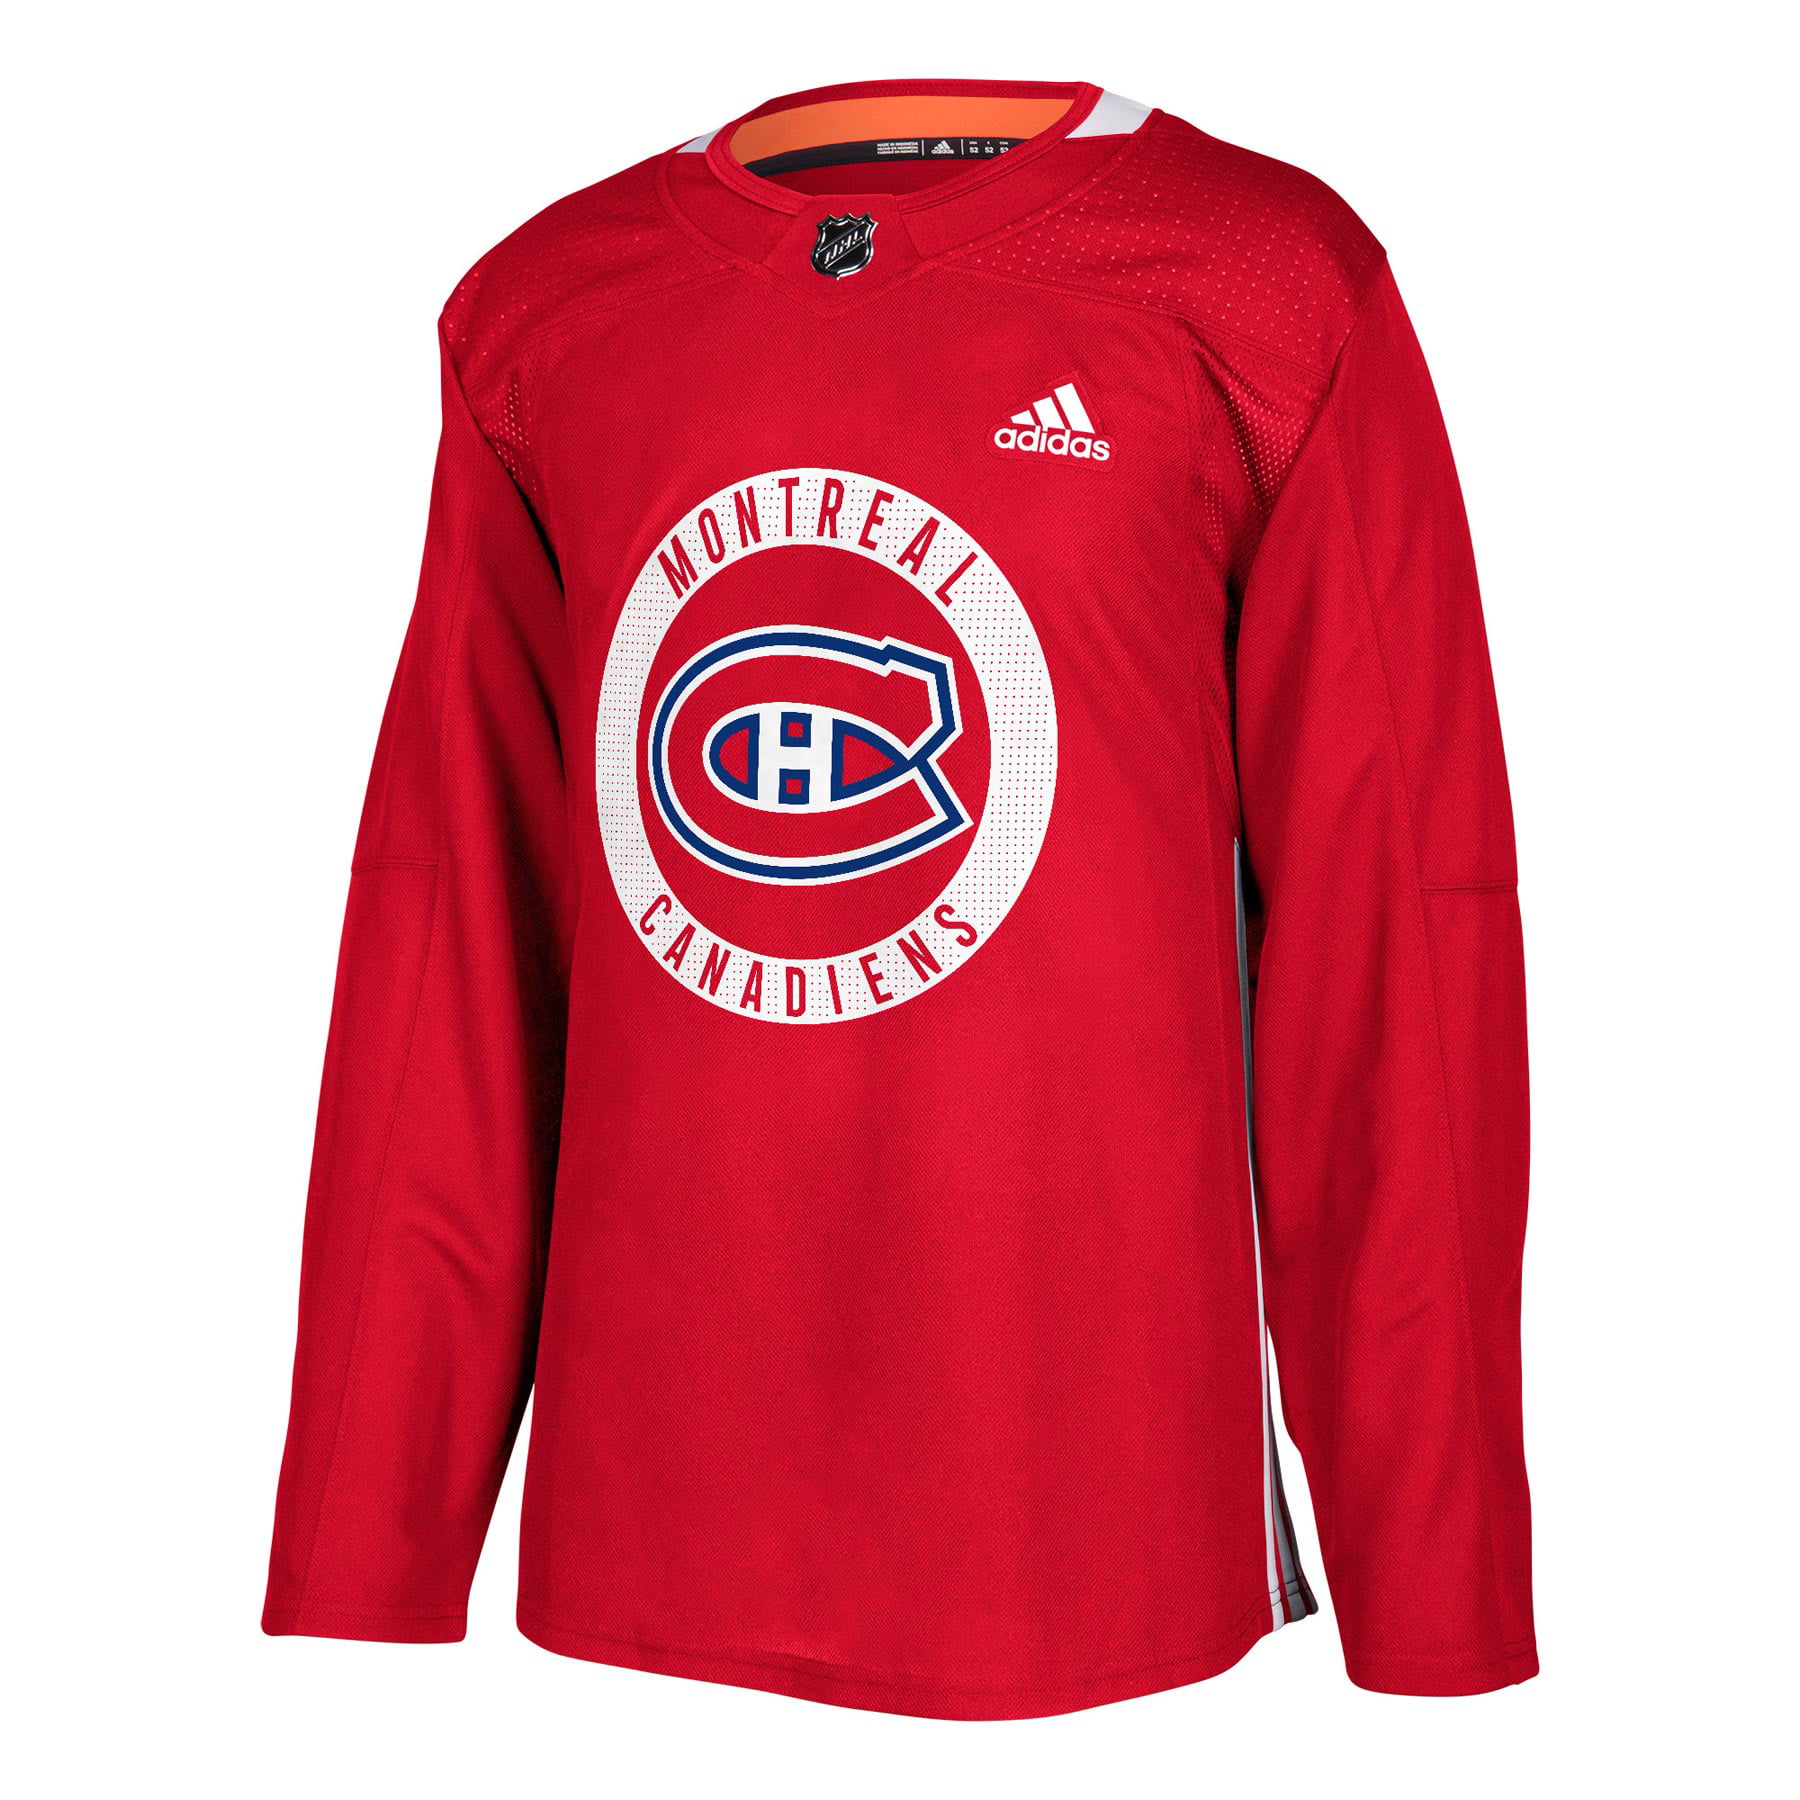 nhl adidas jersey concepts